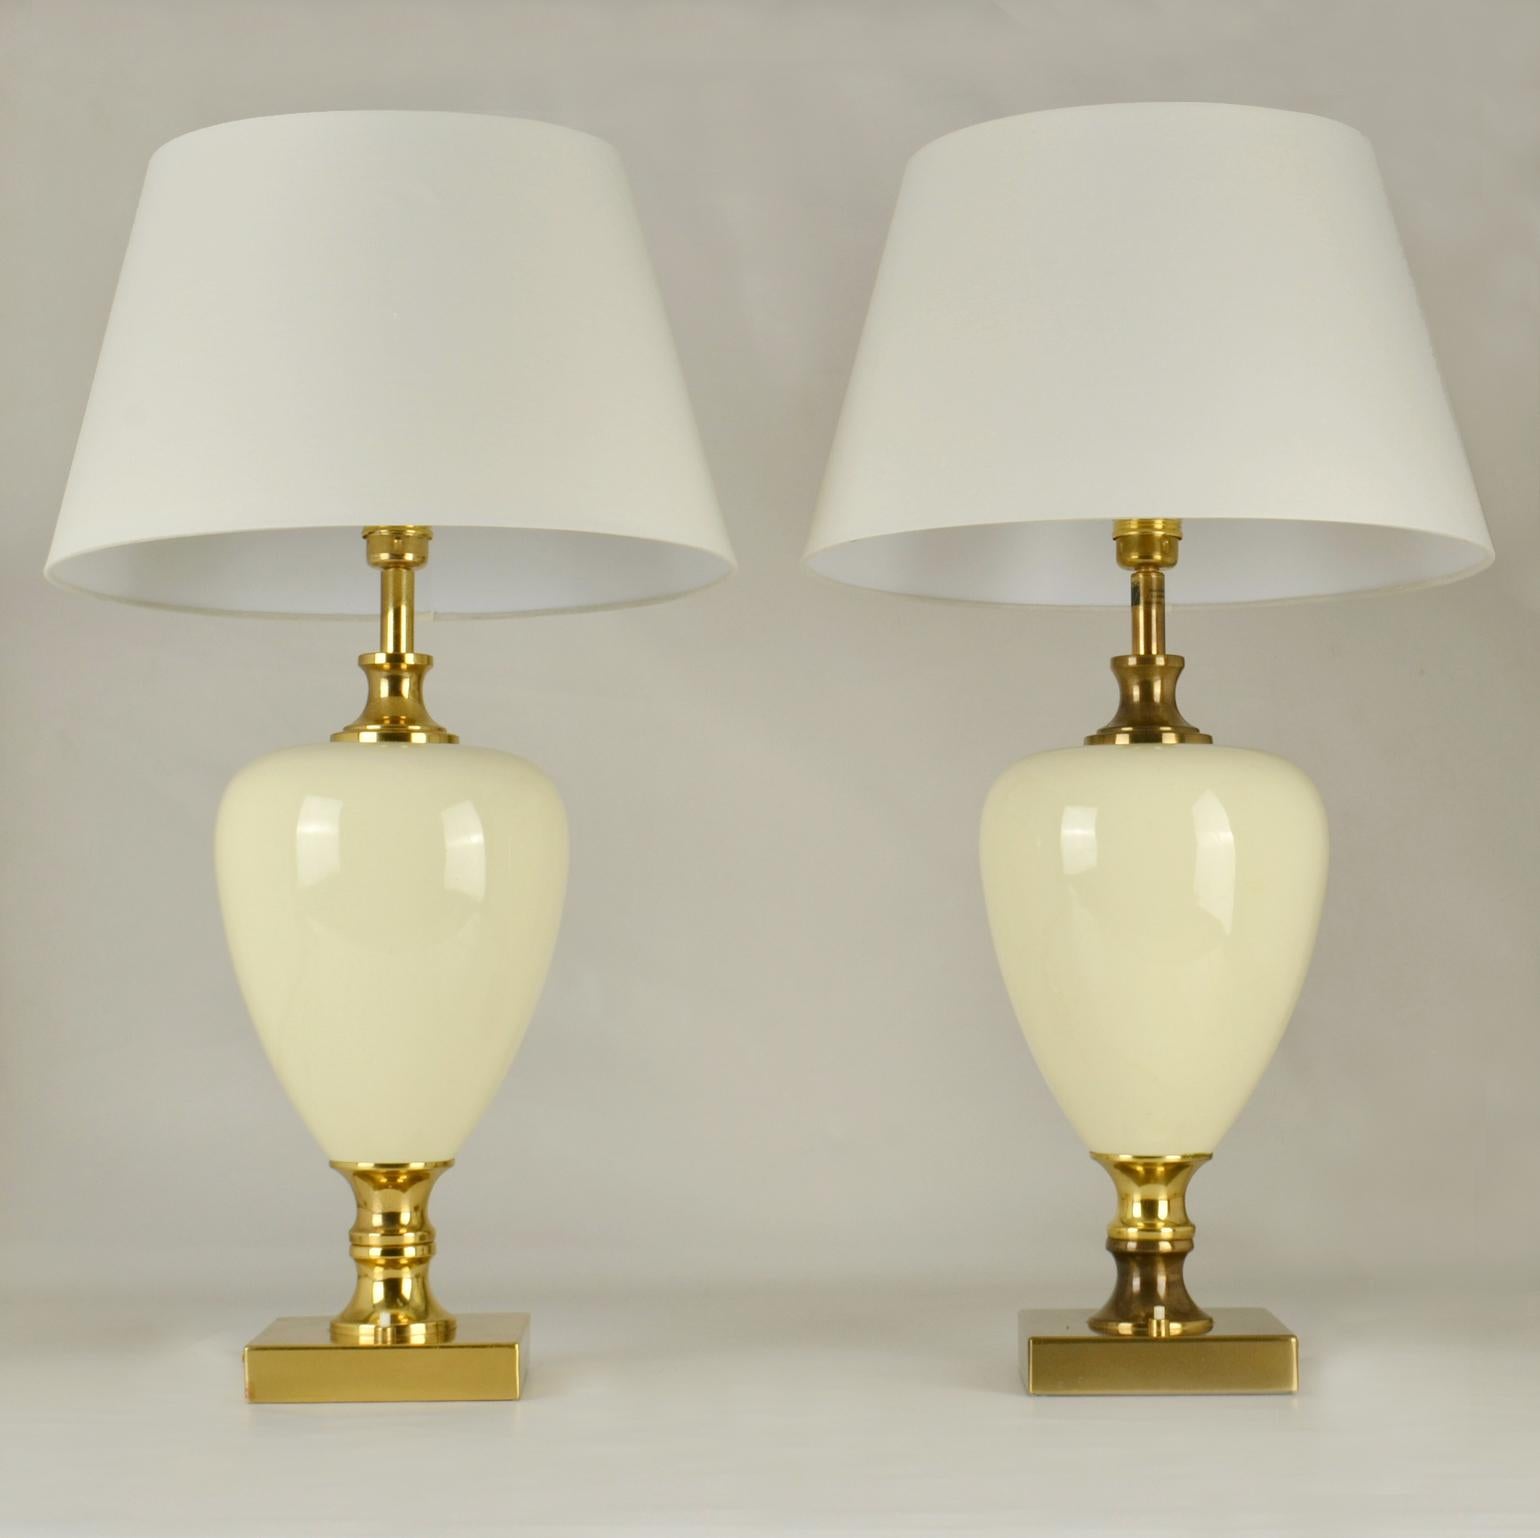 Pair of Cream Porcelain and Brass Table Lamps by Zonca, Italy, 1970s In Good Condition For Sale In London, GB